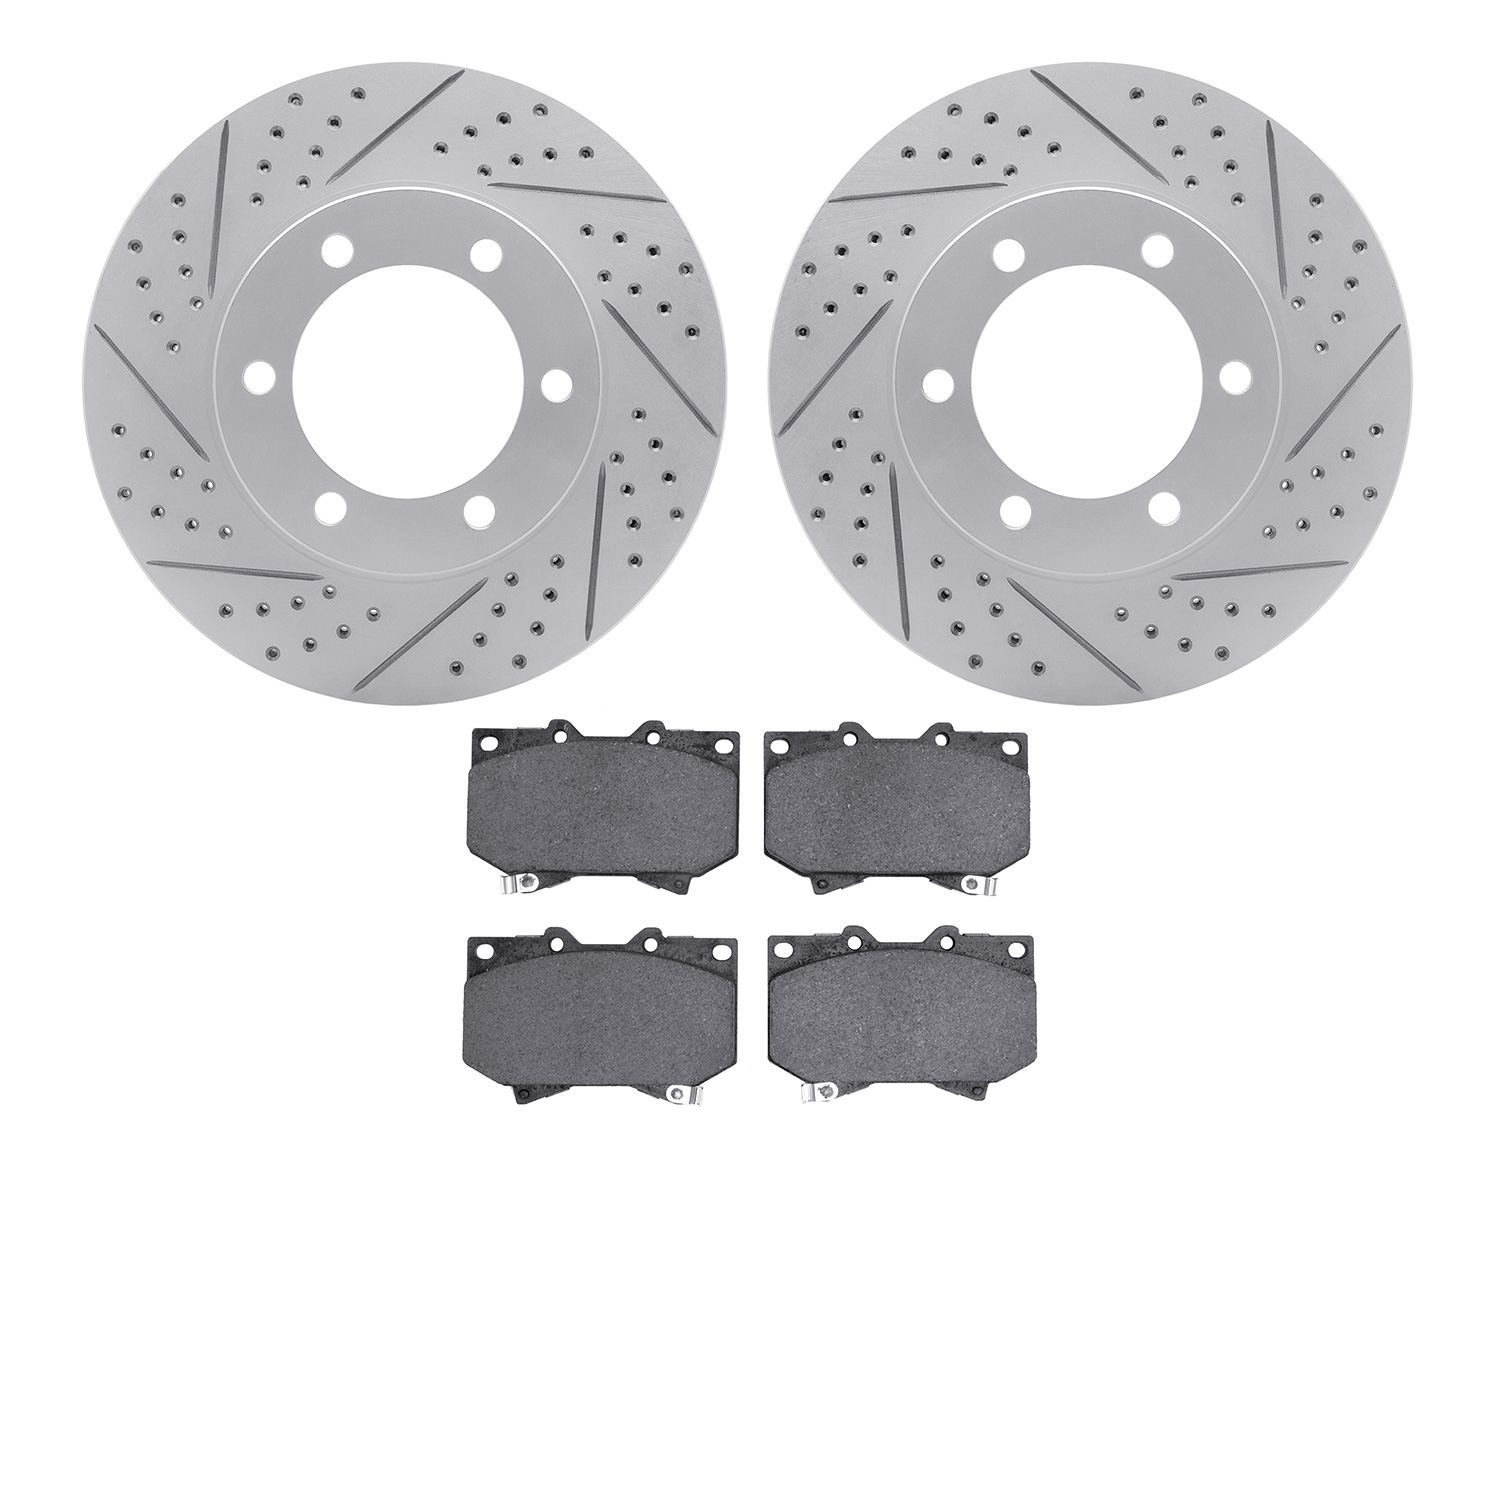 2502-76117 Geoperformance Drilled/Slotted Rotors w/5000 Advanced Brake Pads Kit, 2000-2002 Lexus/Toyota/Scion, Position: Front